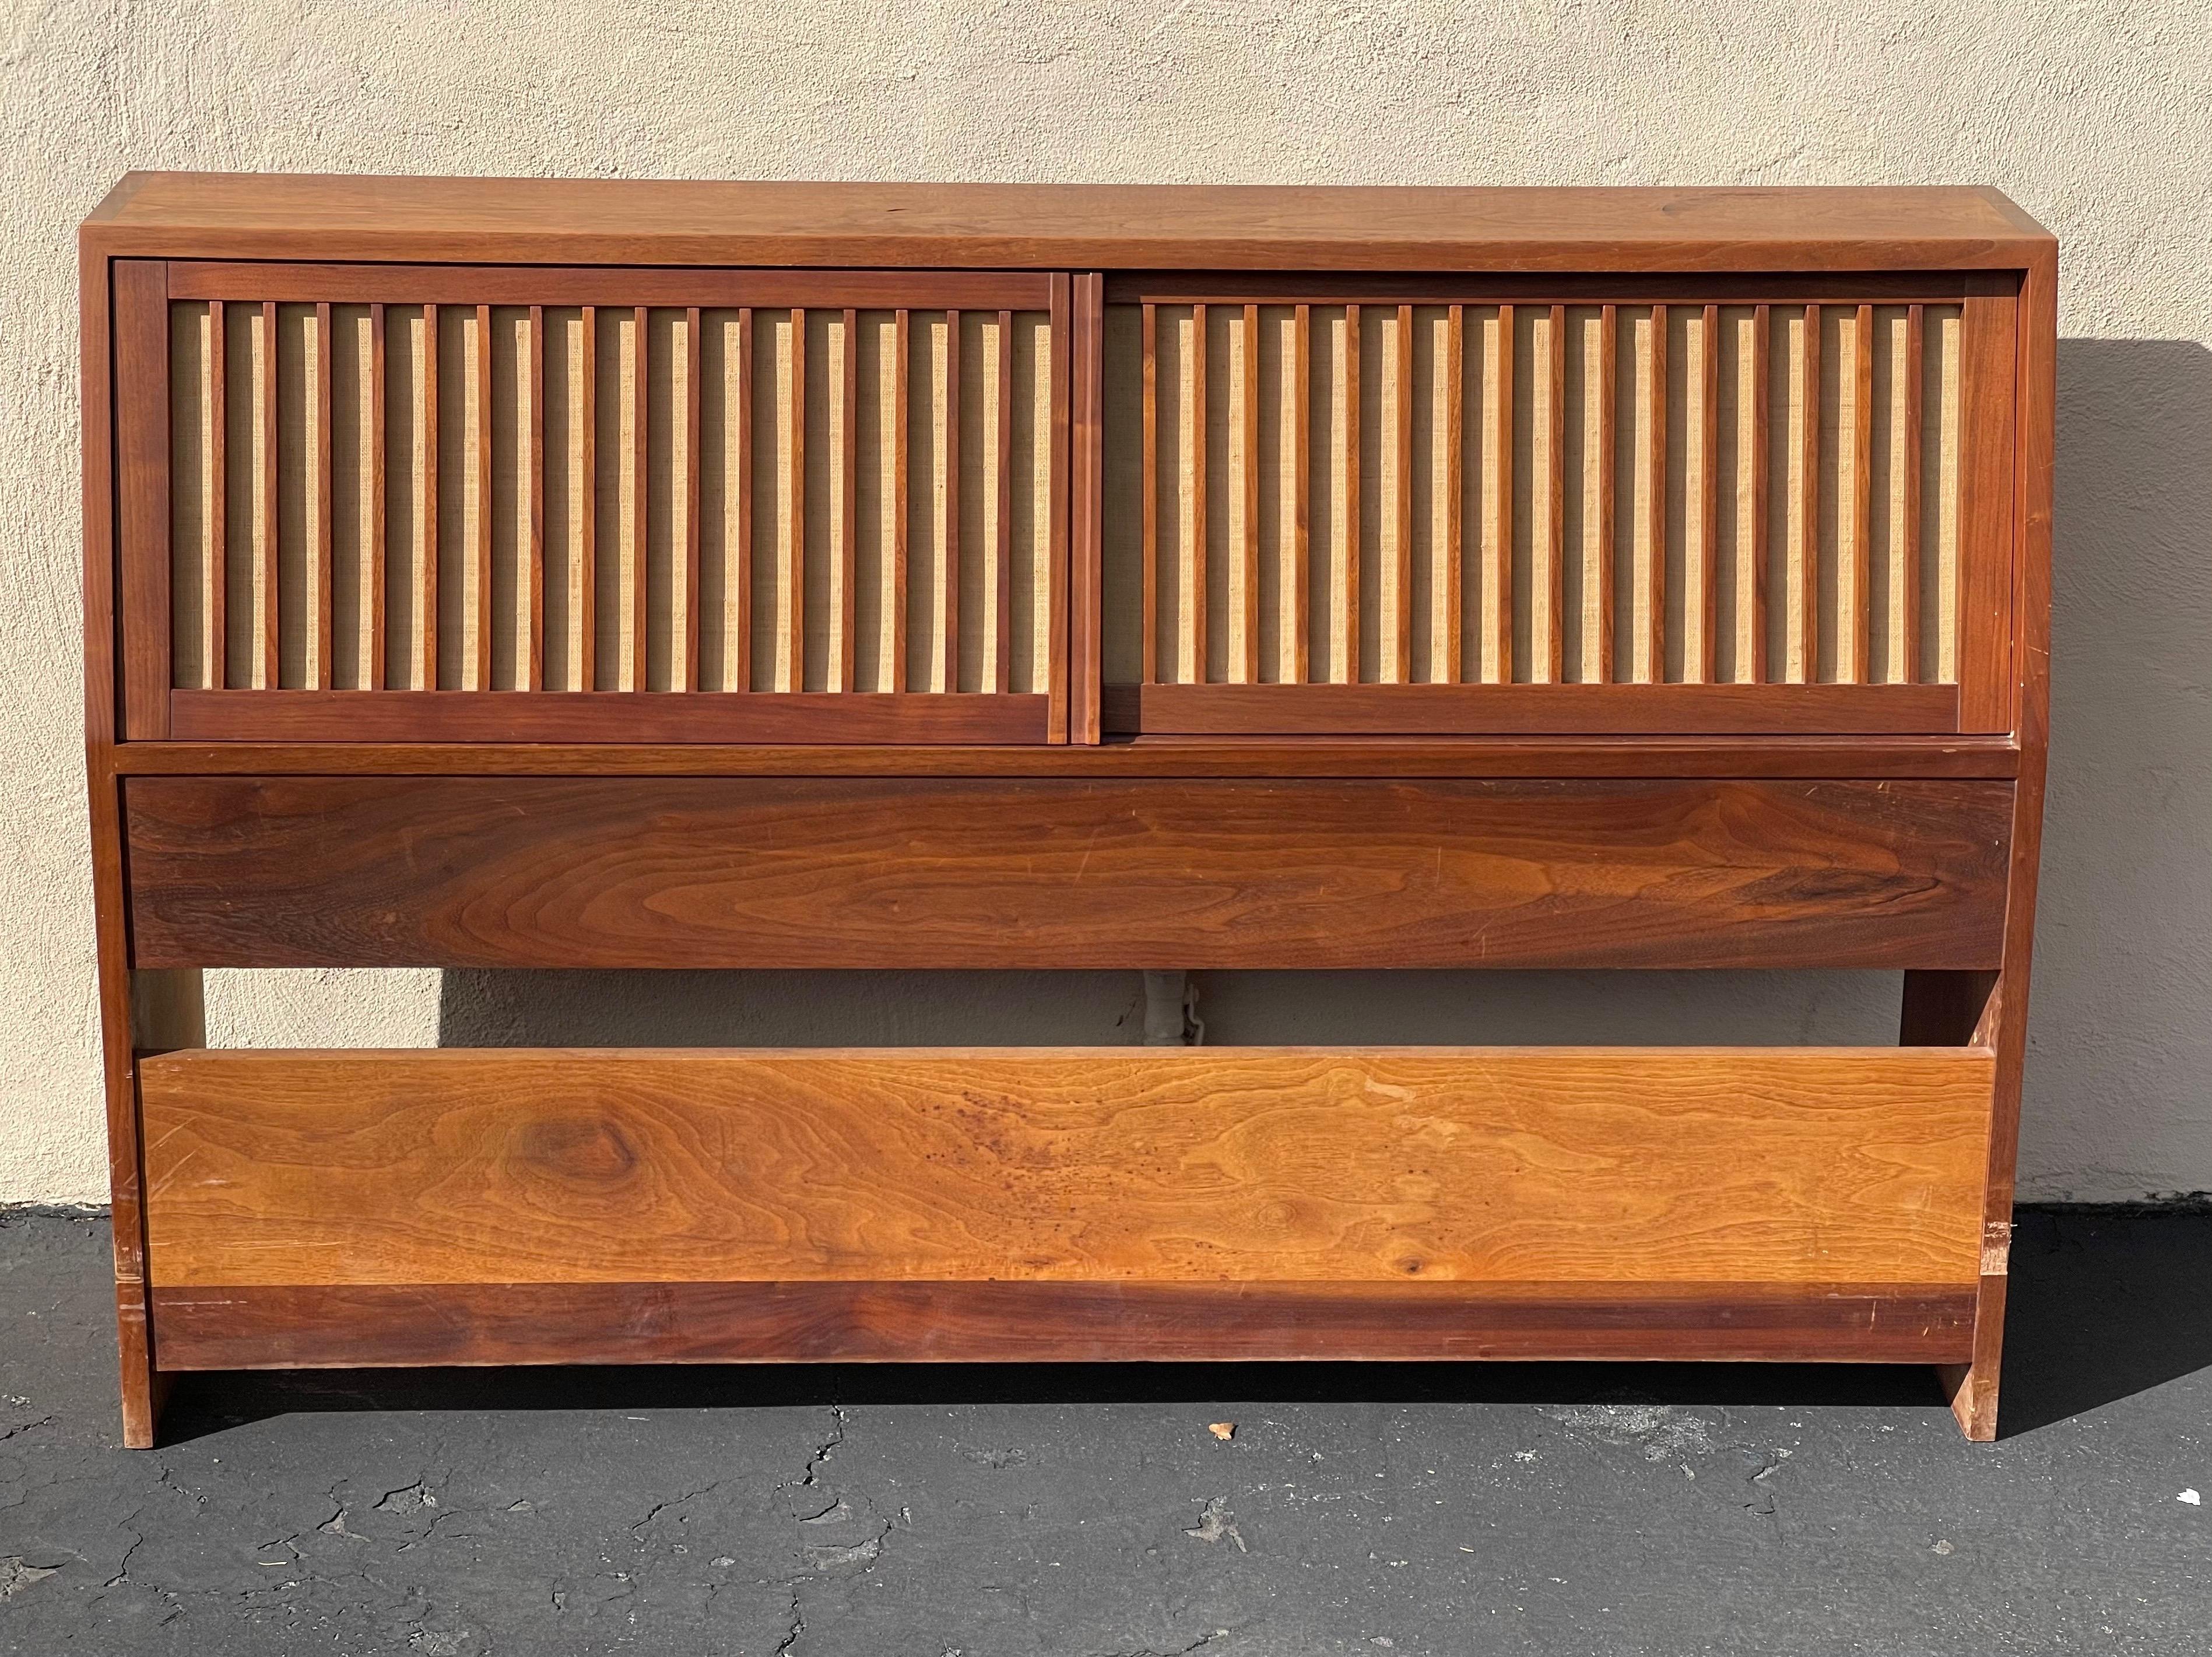 Striking Handcrafted Storage Headboard by George Nakashima with Paperwork, 1959 In Good Condition For Sale In San Diego, CA